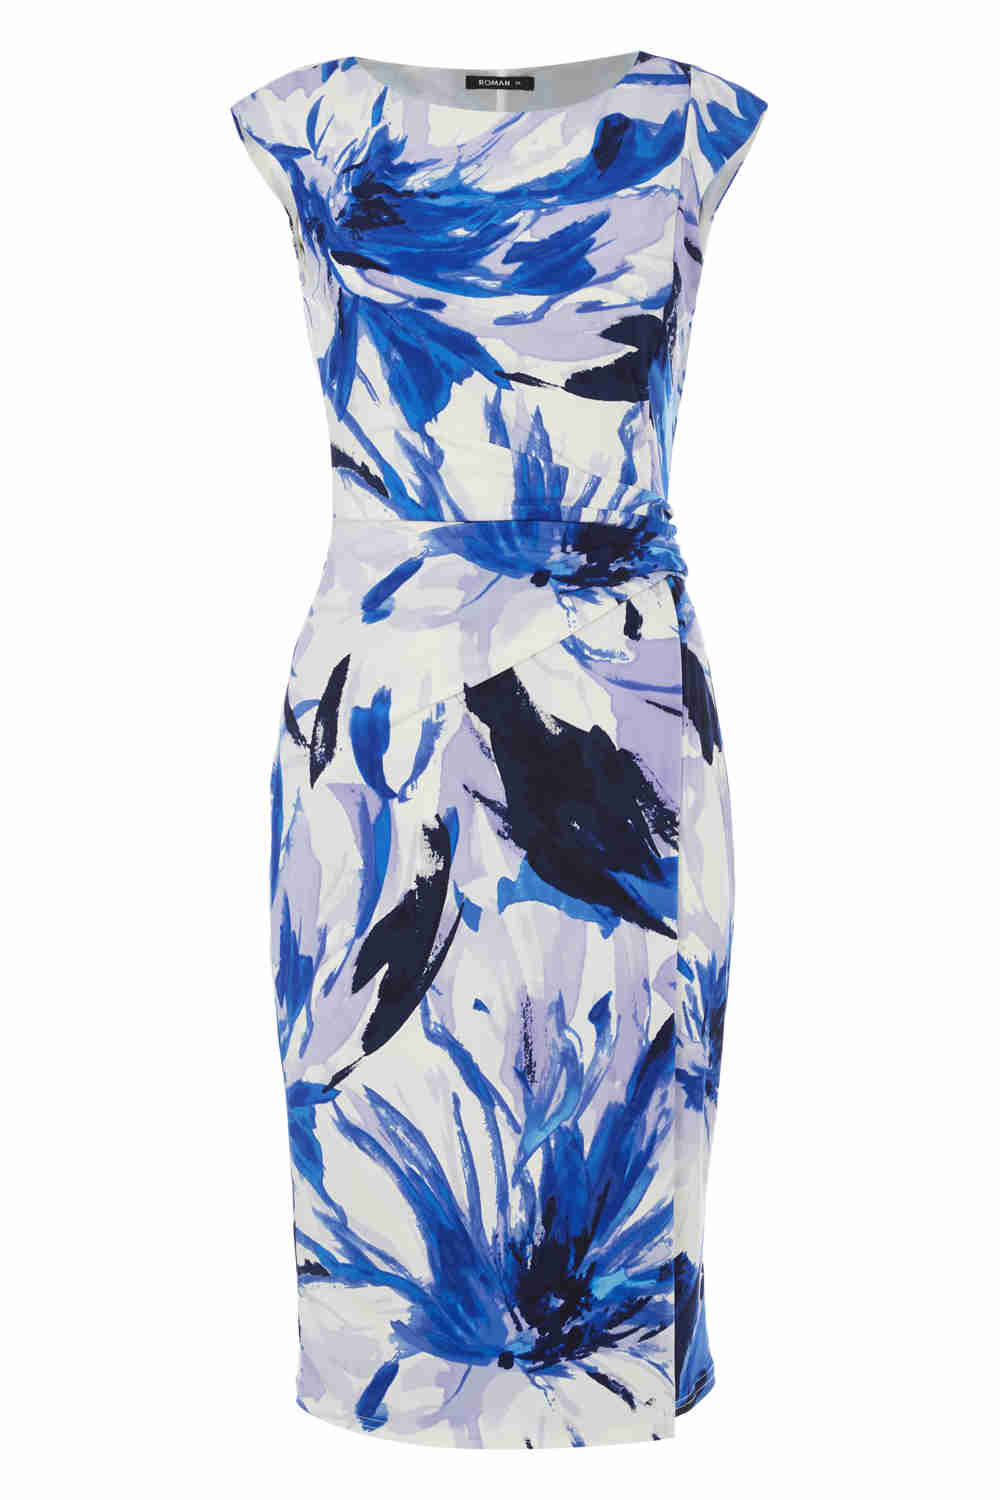 Royal Blue Abstract Underwater Floral Print Dress, Image 4 of 4